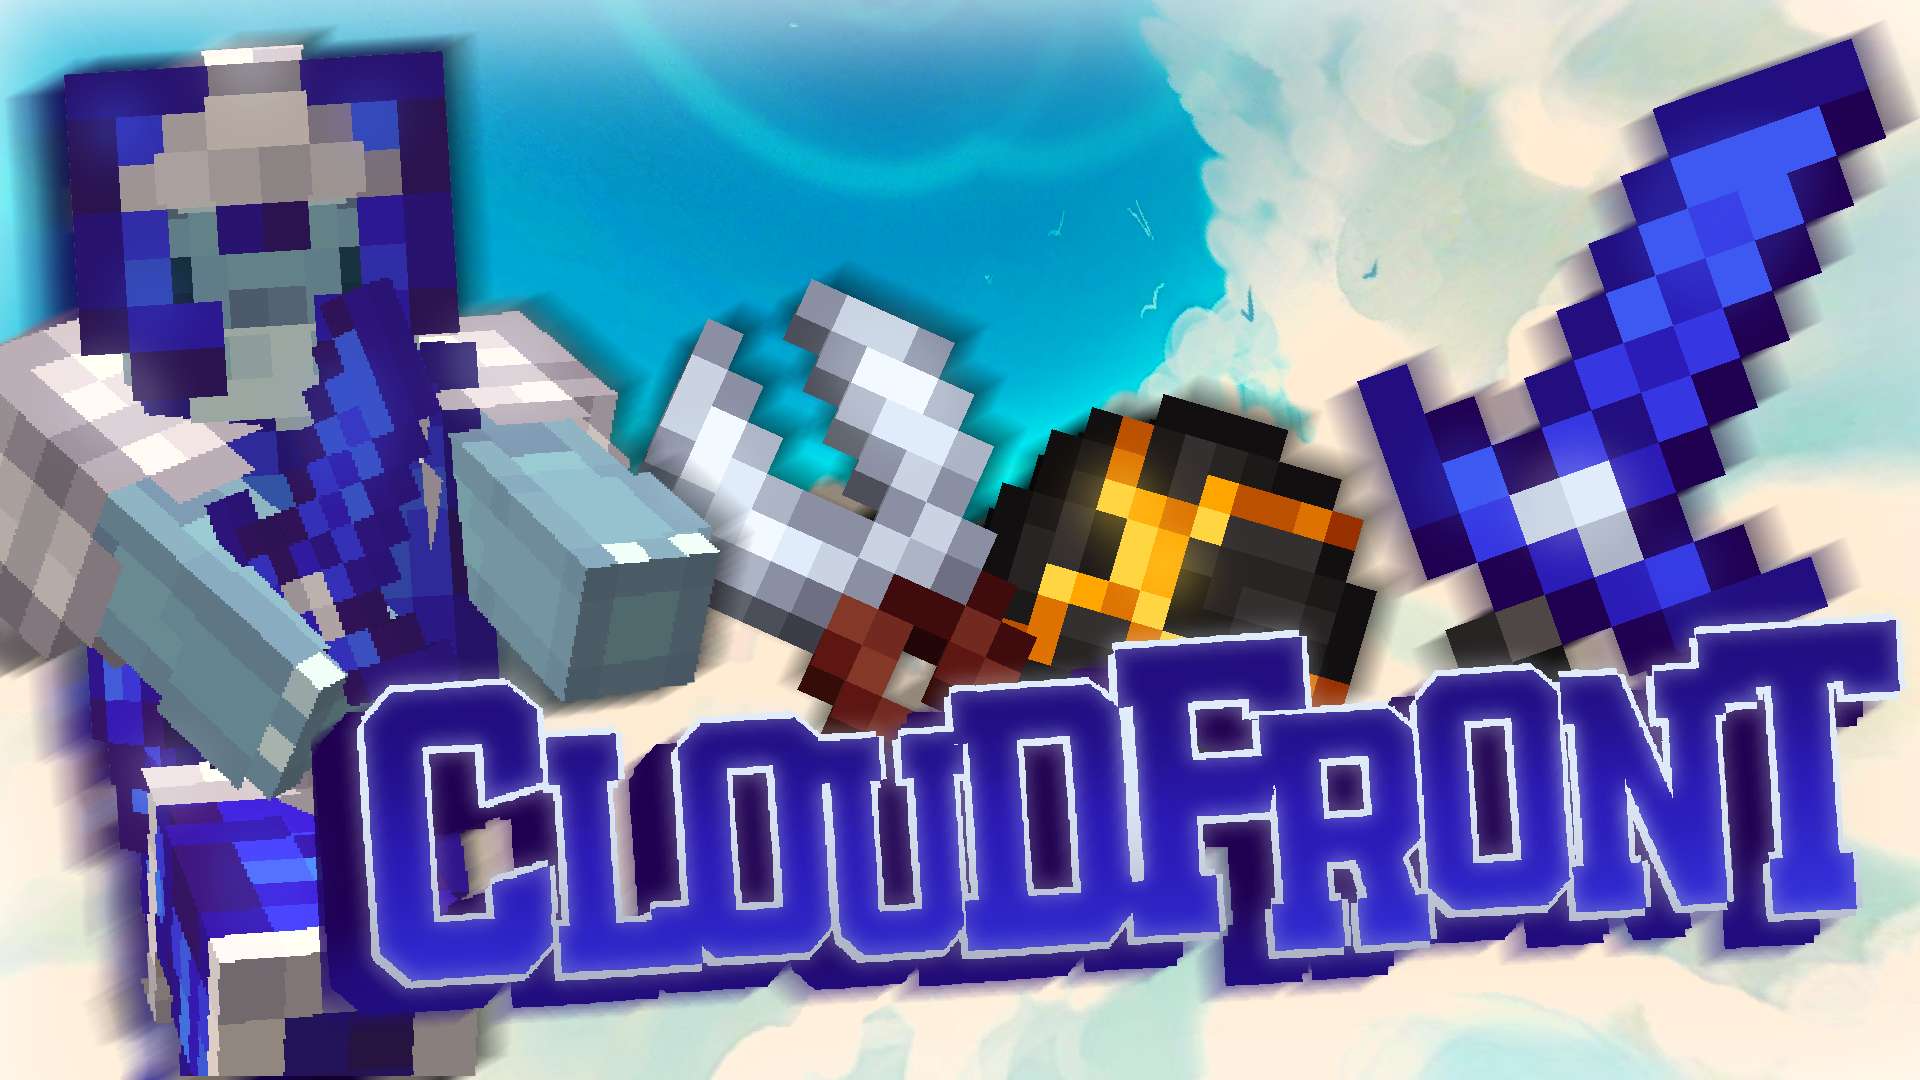 Cloudfront 16 by Wyvernishpacks on PvPRP